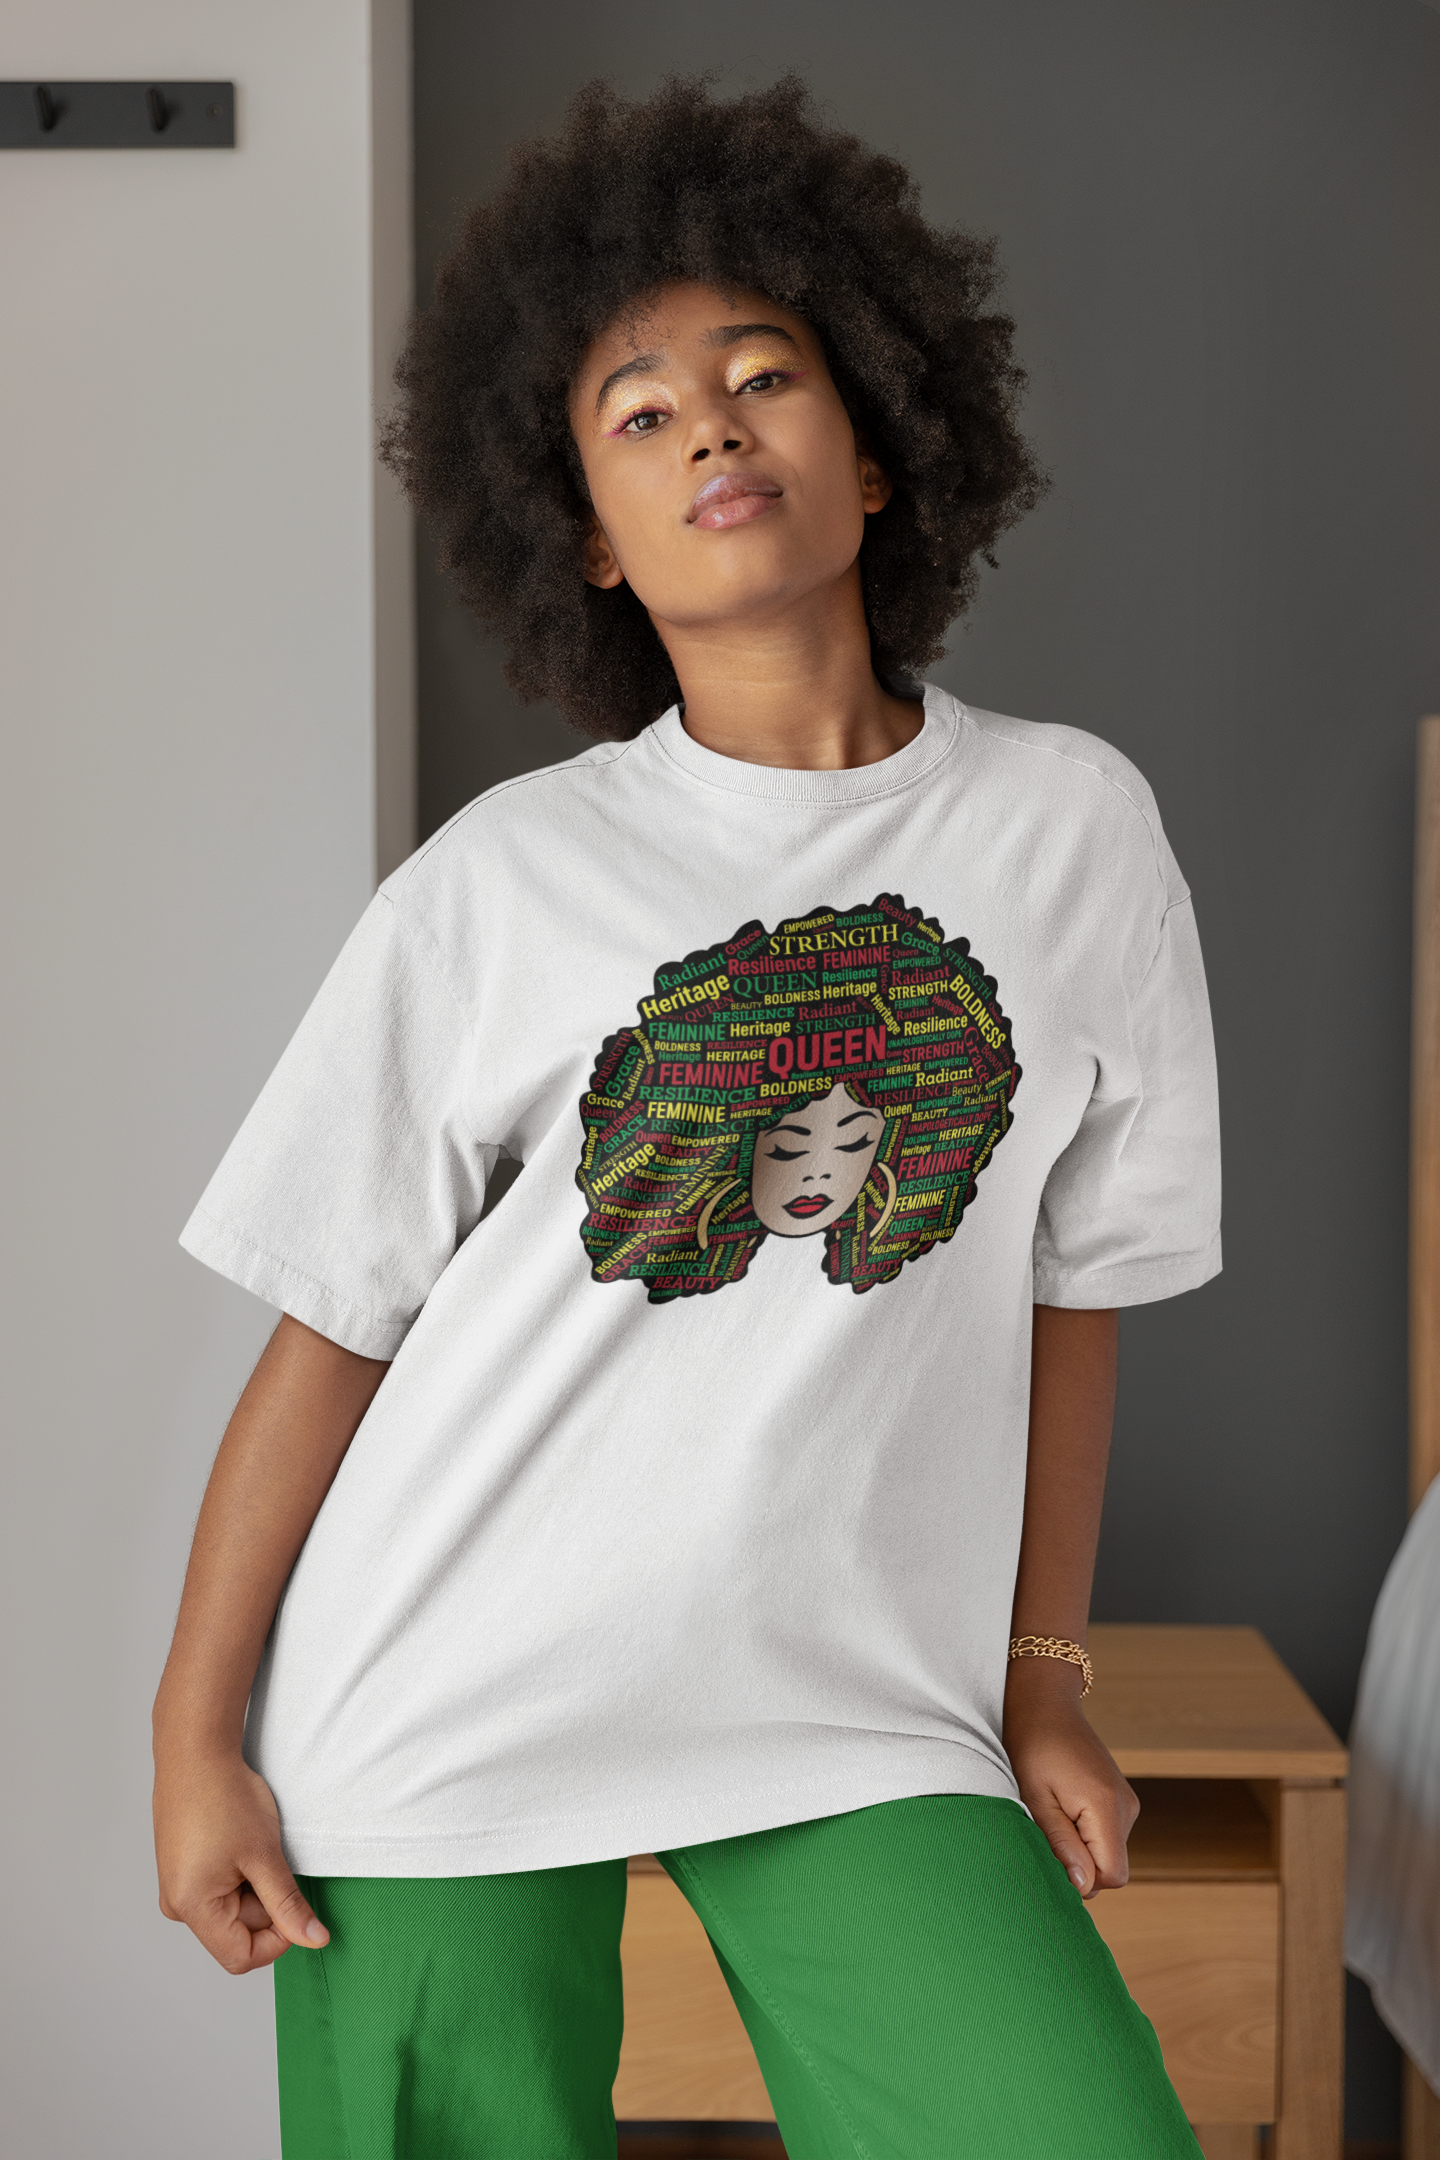 white-t-shirt-gildan-bhm-black-history-month-woman-afro-hairstyle-typography-design-woman.png